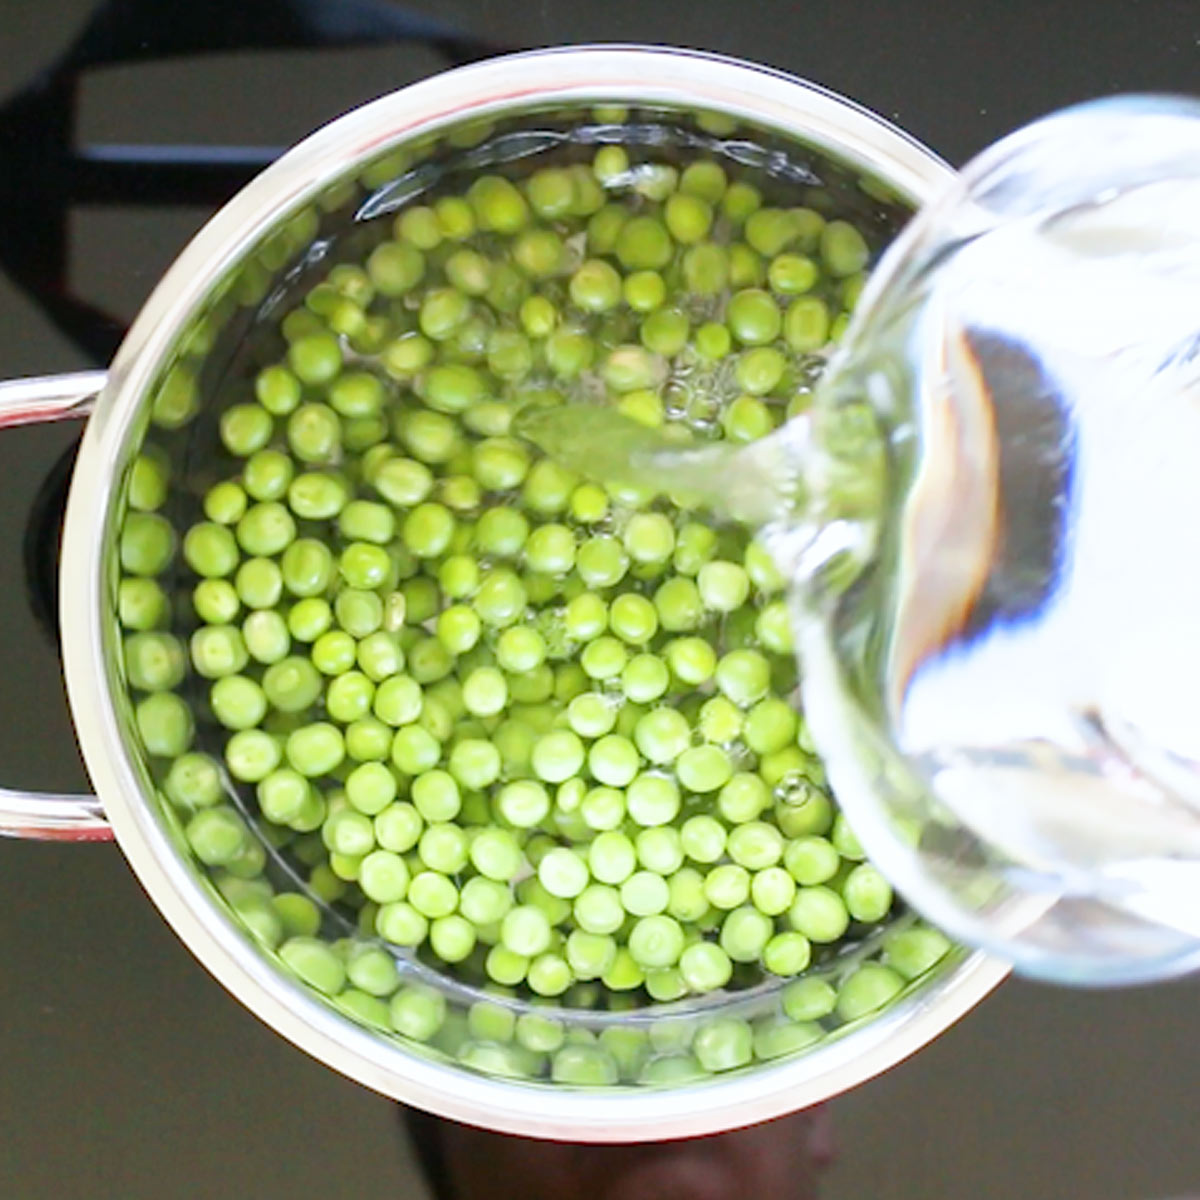 pour water over green peas in sauce pan